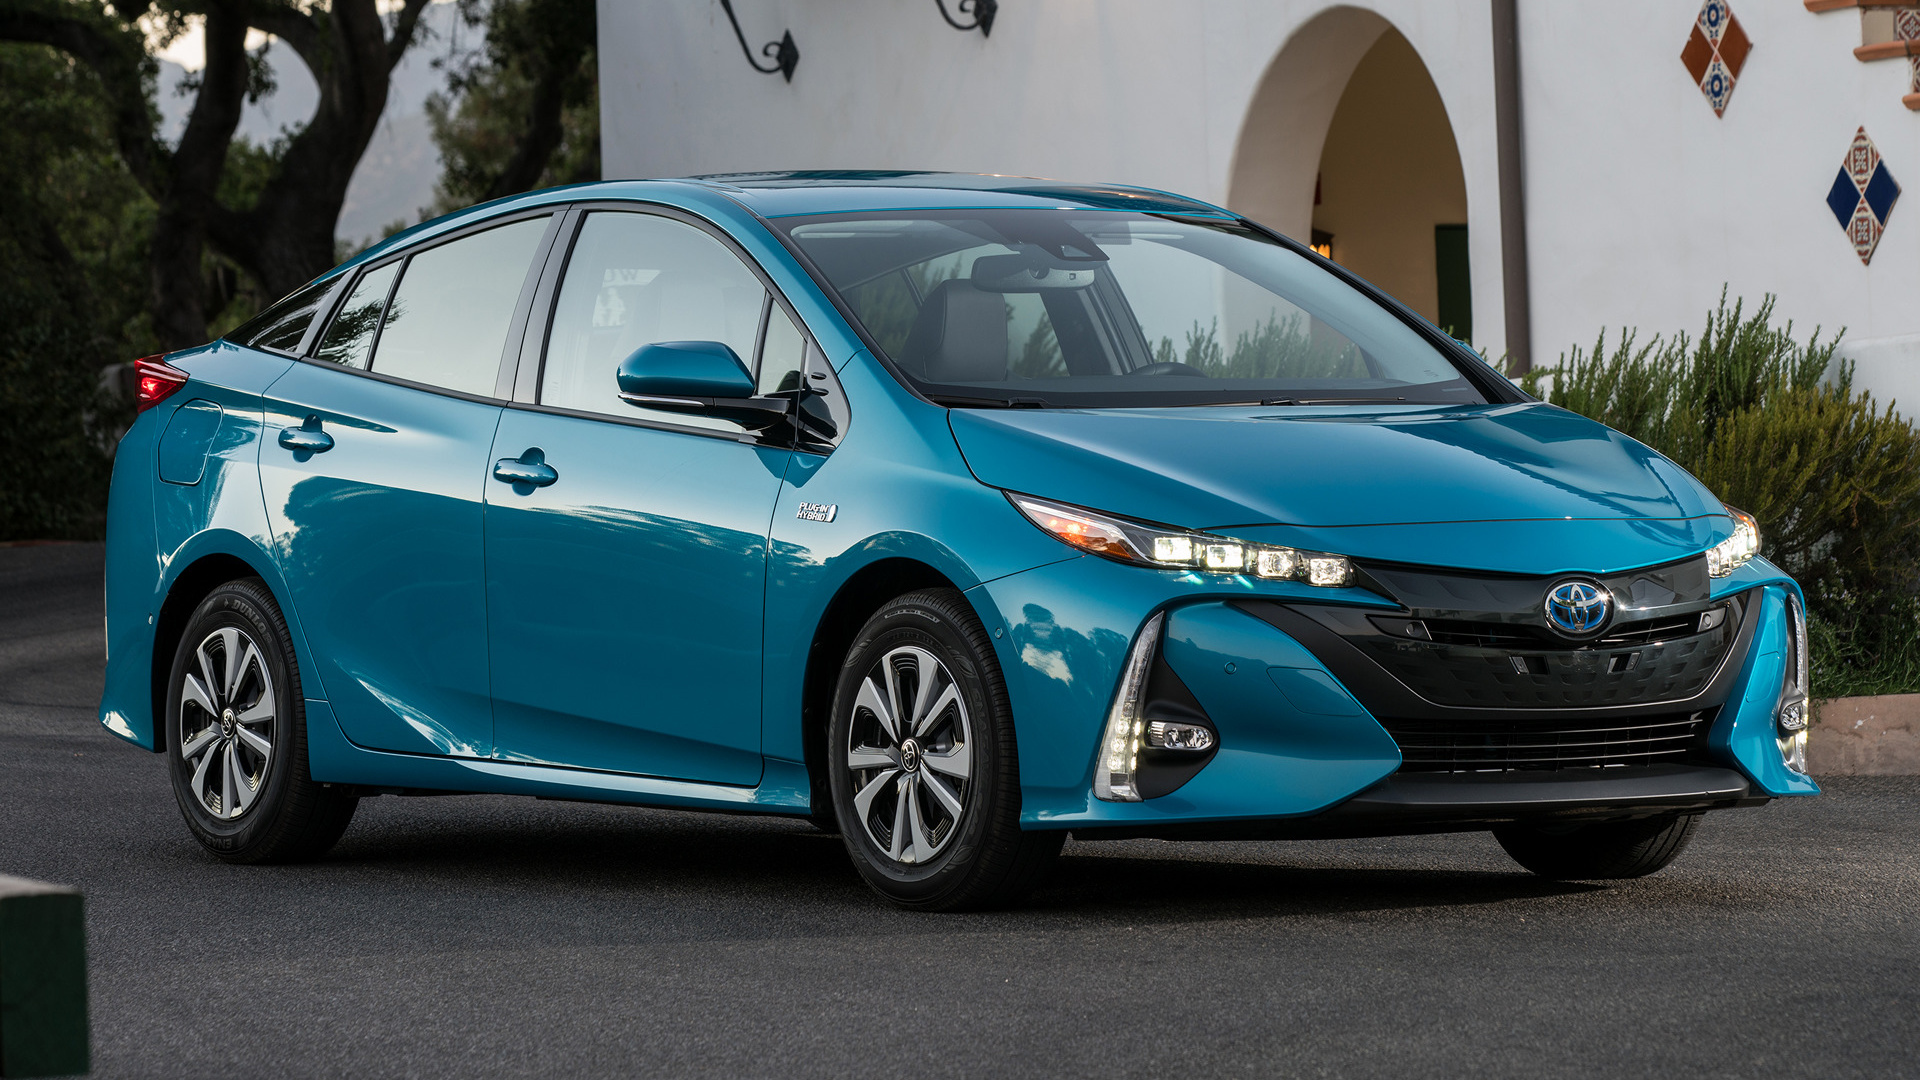 View the wide range of new vauxhall cars available from thurlow nunn vauxhall in norfolk, suffolk, bedfordshire, buckinghamshire and cambridgeshire. 2017 Toyota Prius Prime Plug-in Hybrid (US) - Wallpapers